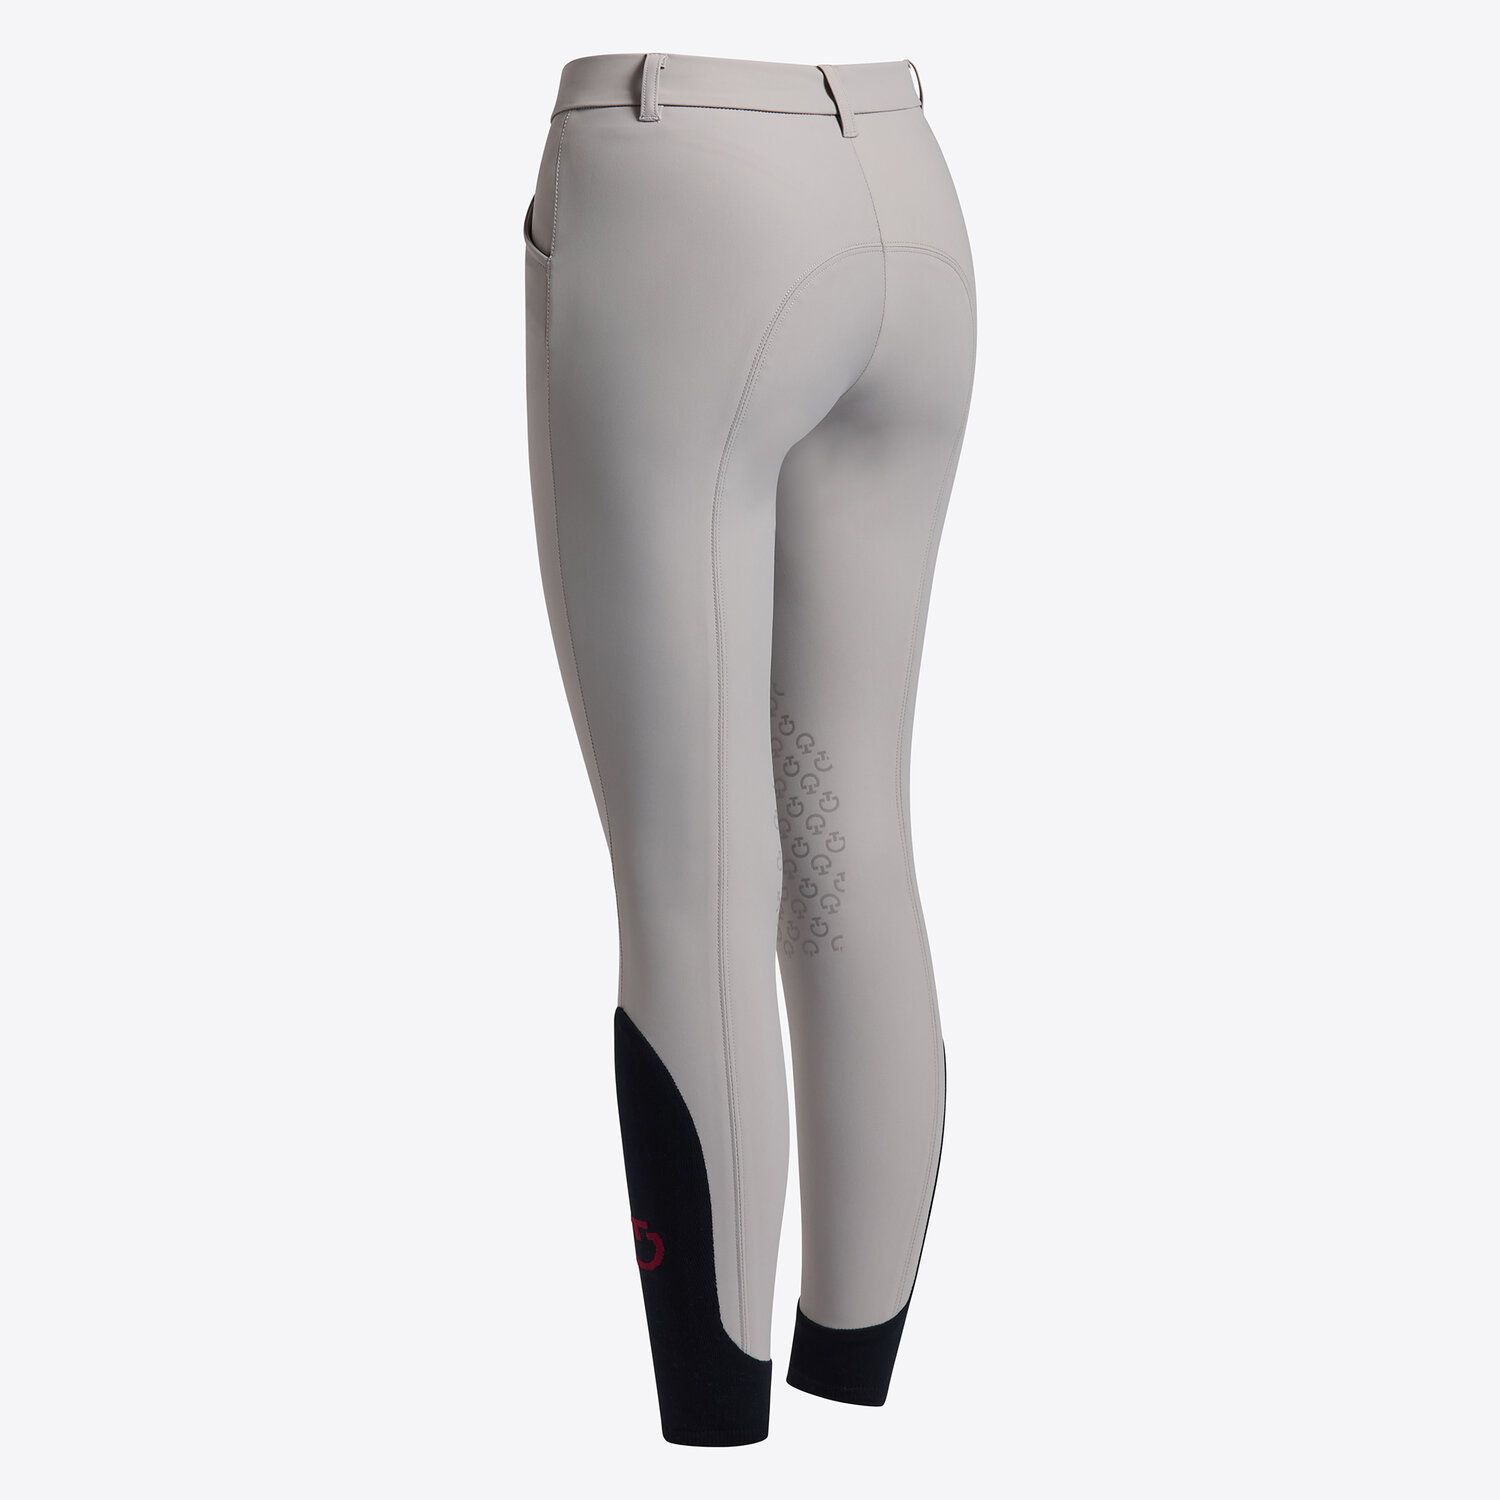 Cavalleria Toscana Unisex Young Riders knee grip jumping breeches LIGHT GREY-2